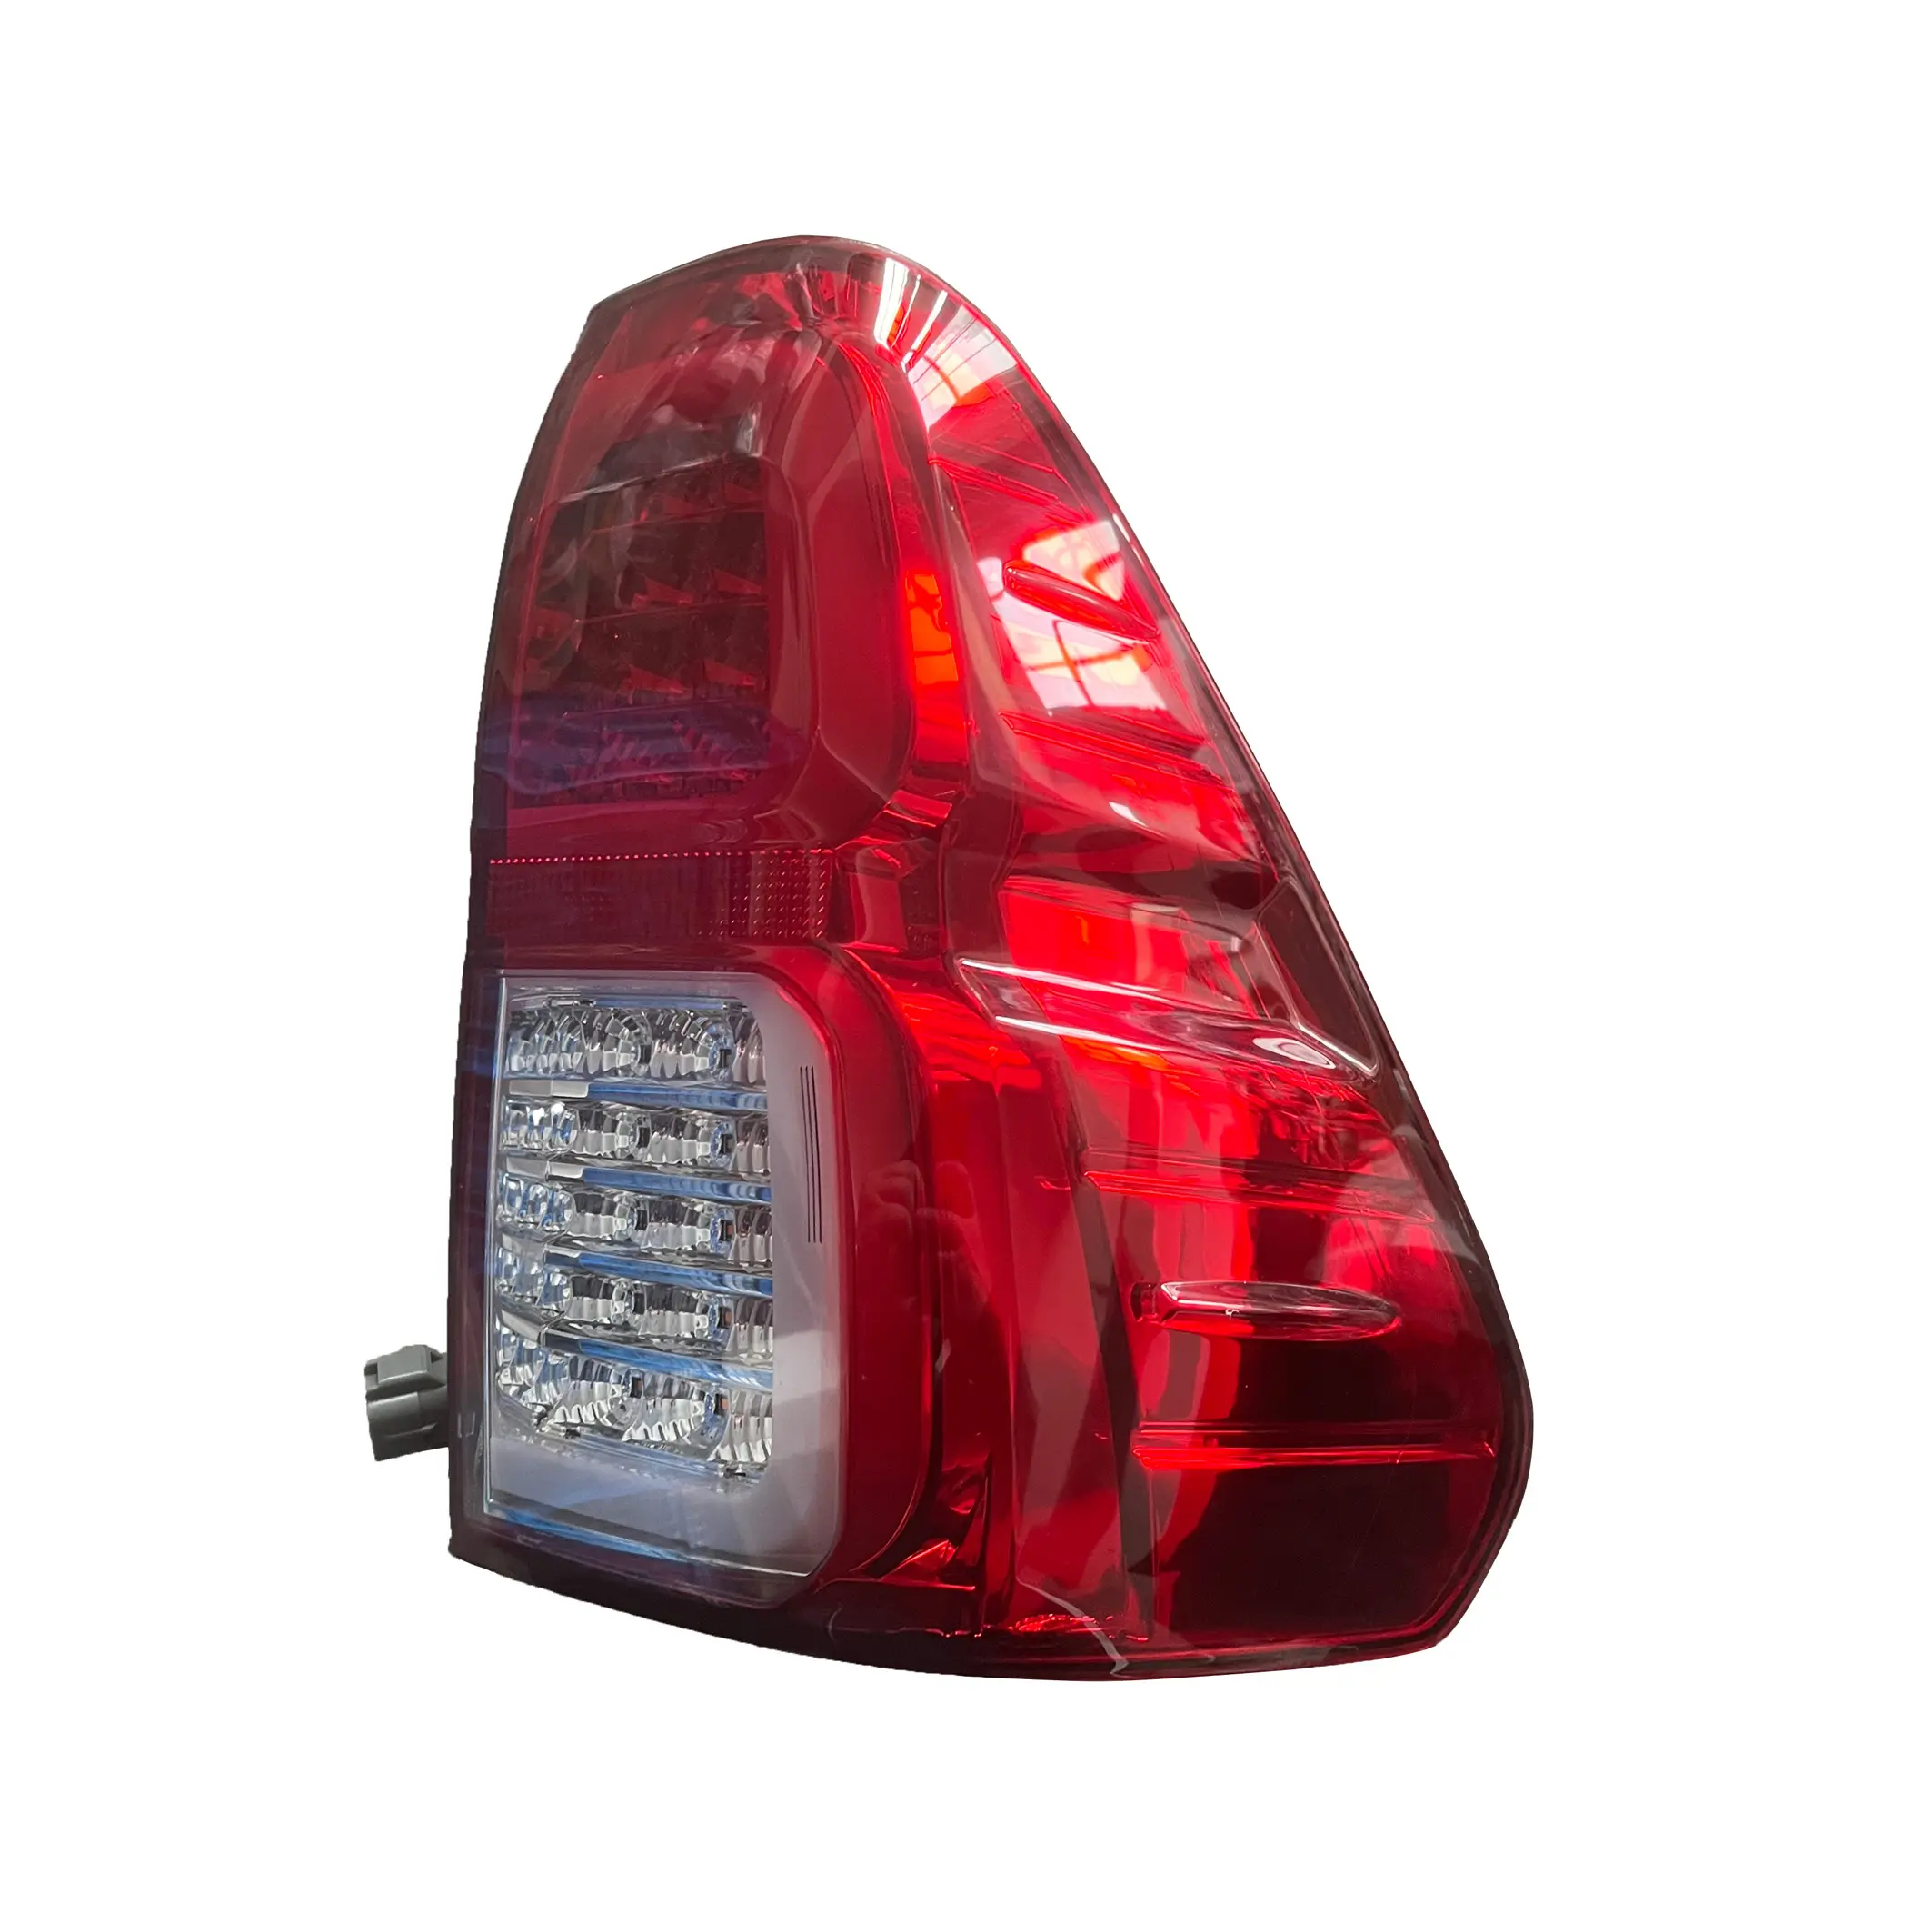 Surprise Price In stock natural white high configuration tail lights for REVO 2015